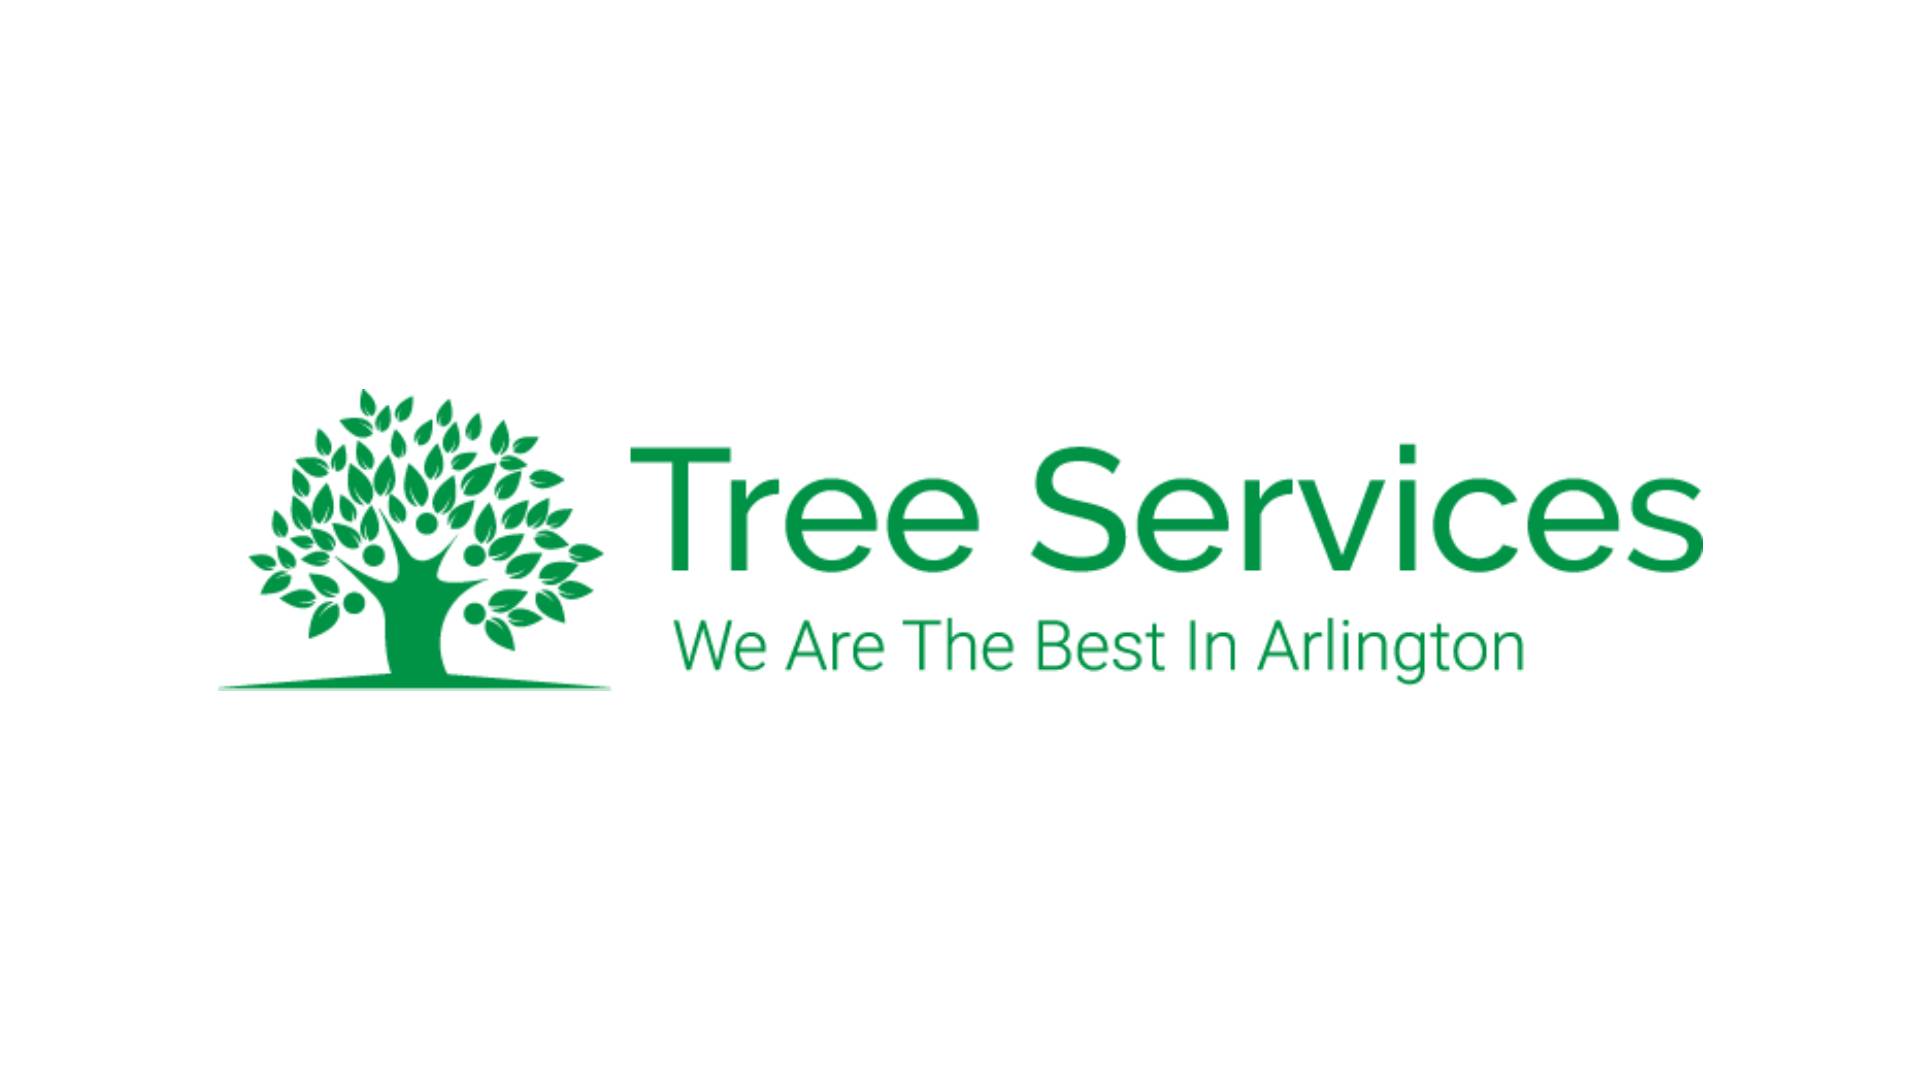 Tree Services In Arlington Texas - Budget Options Available